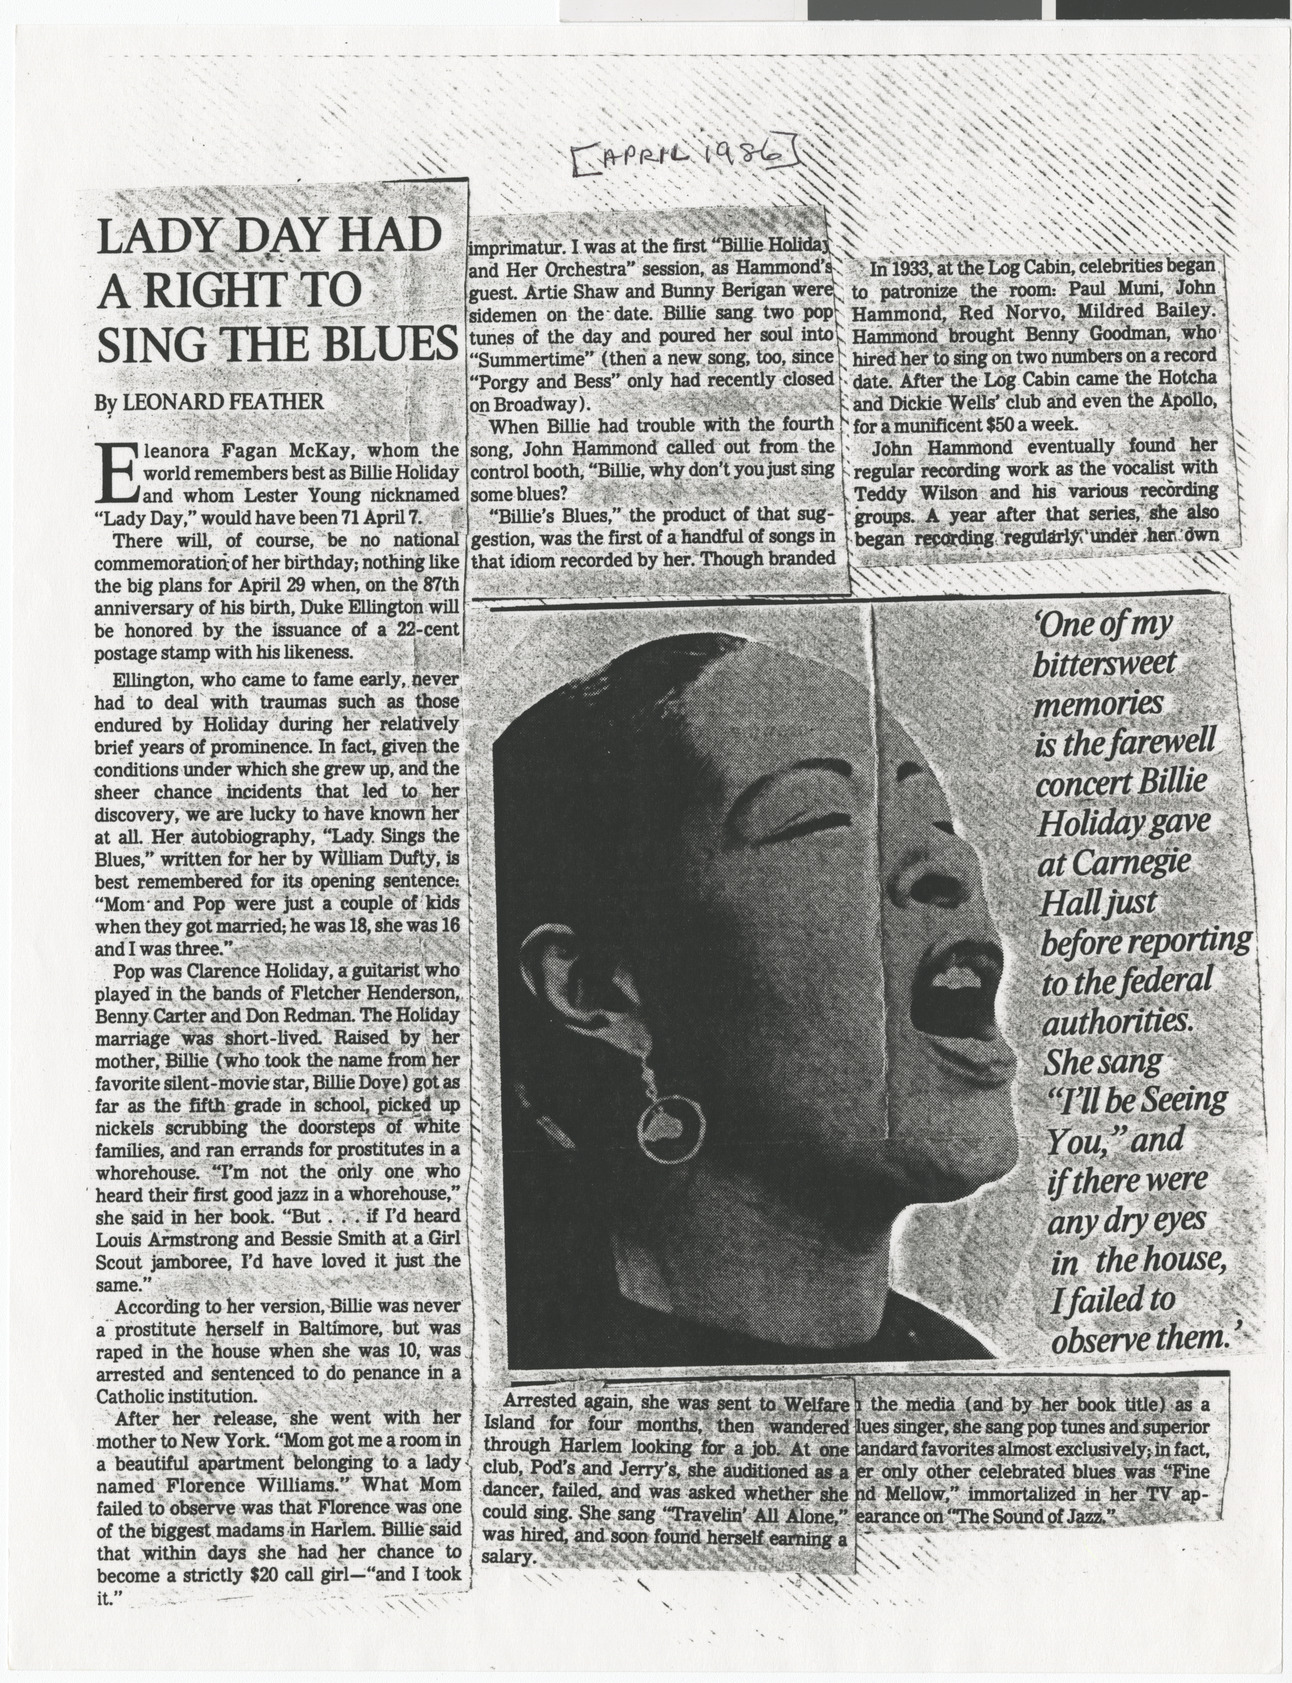 Newspaper clipping (copy), Lady Day had a right to sing the blues, publication unknown, 1986